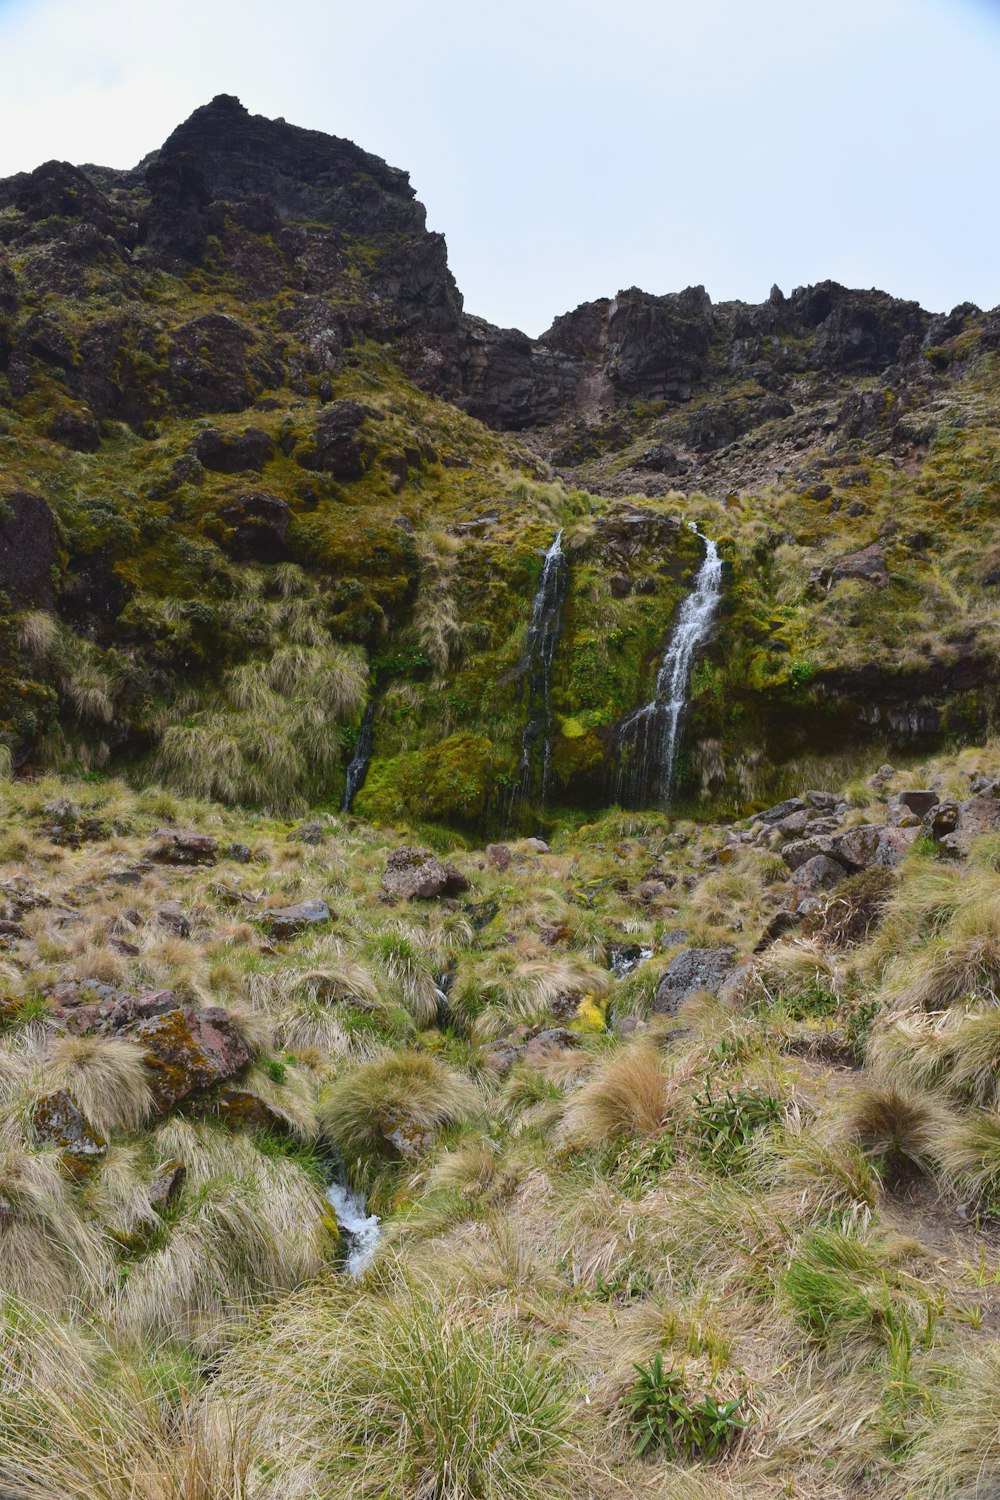 a small waterfall in the middle of a grassy area